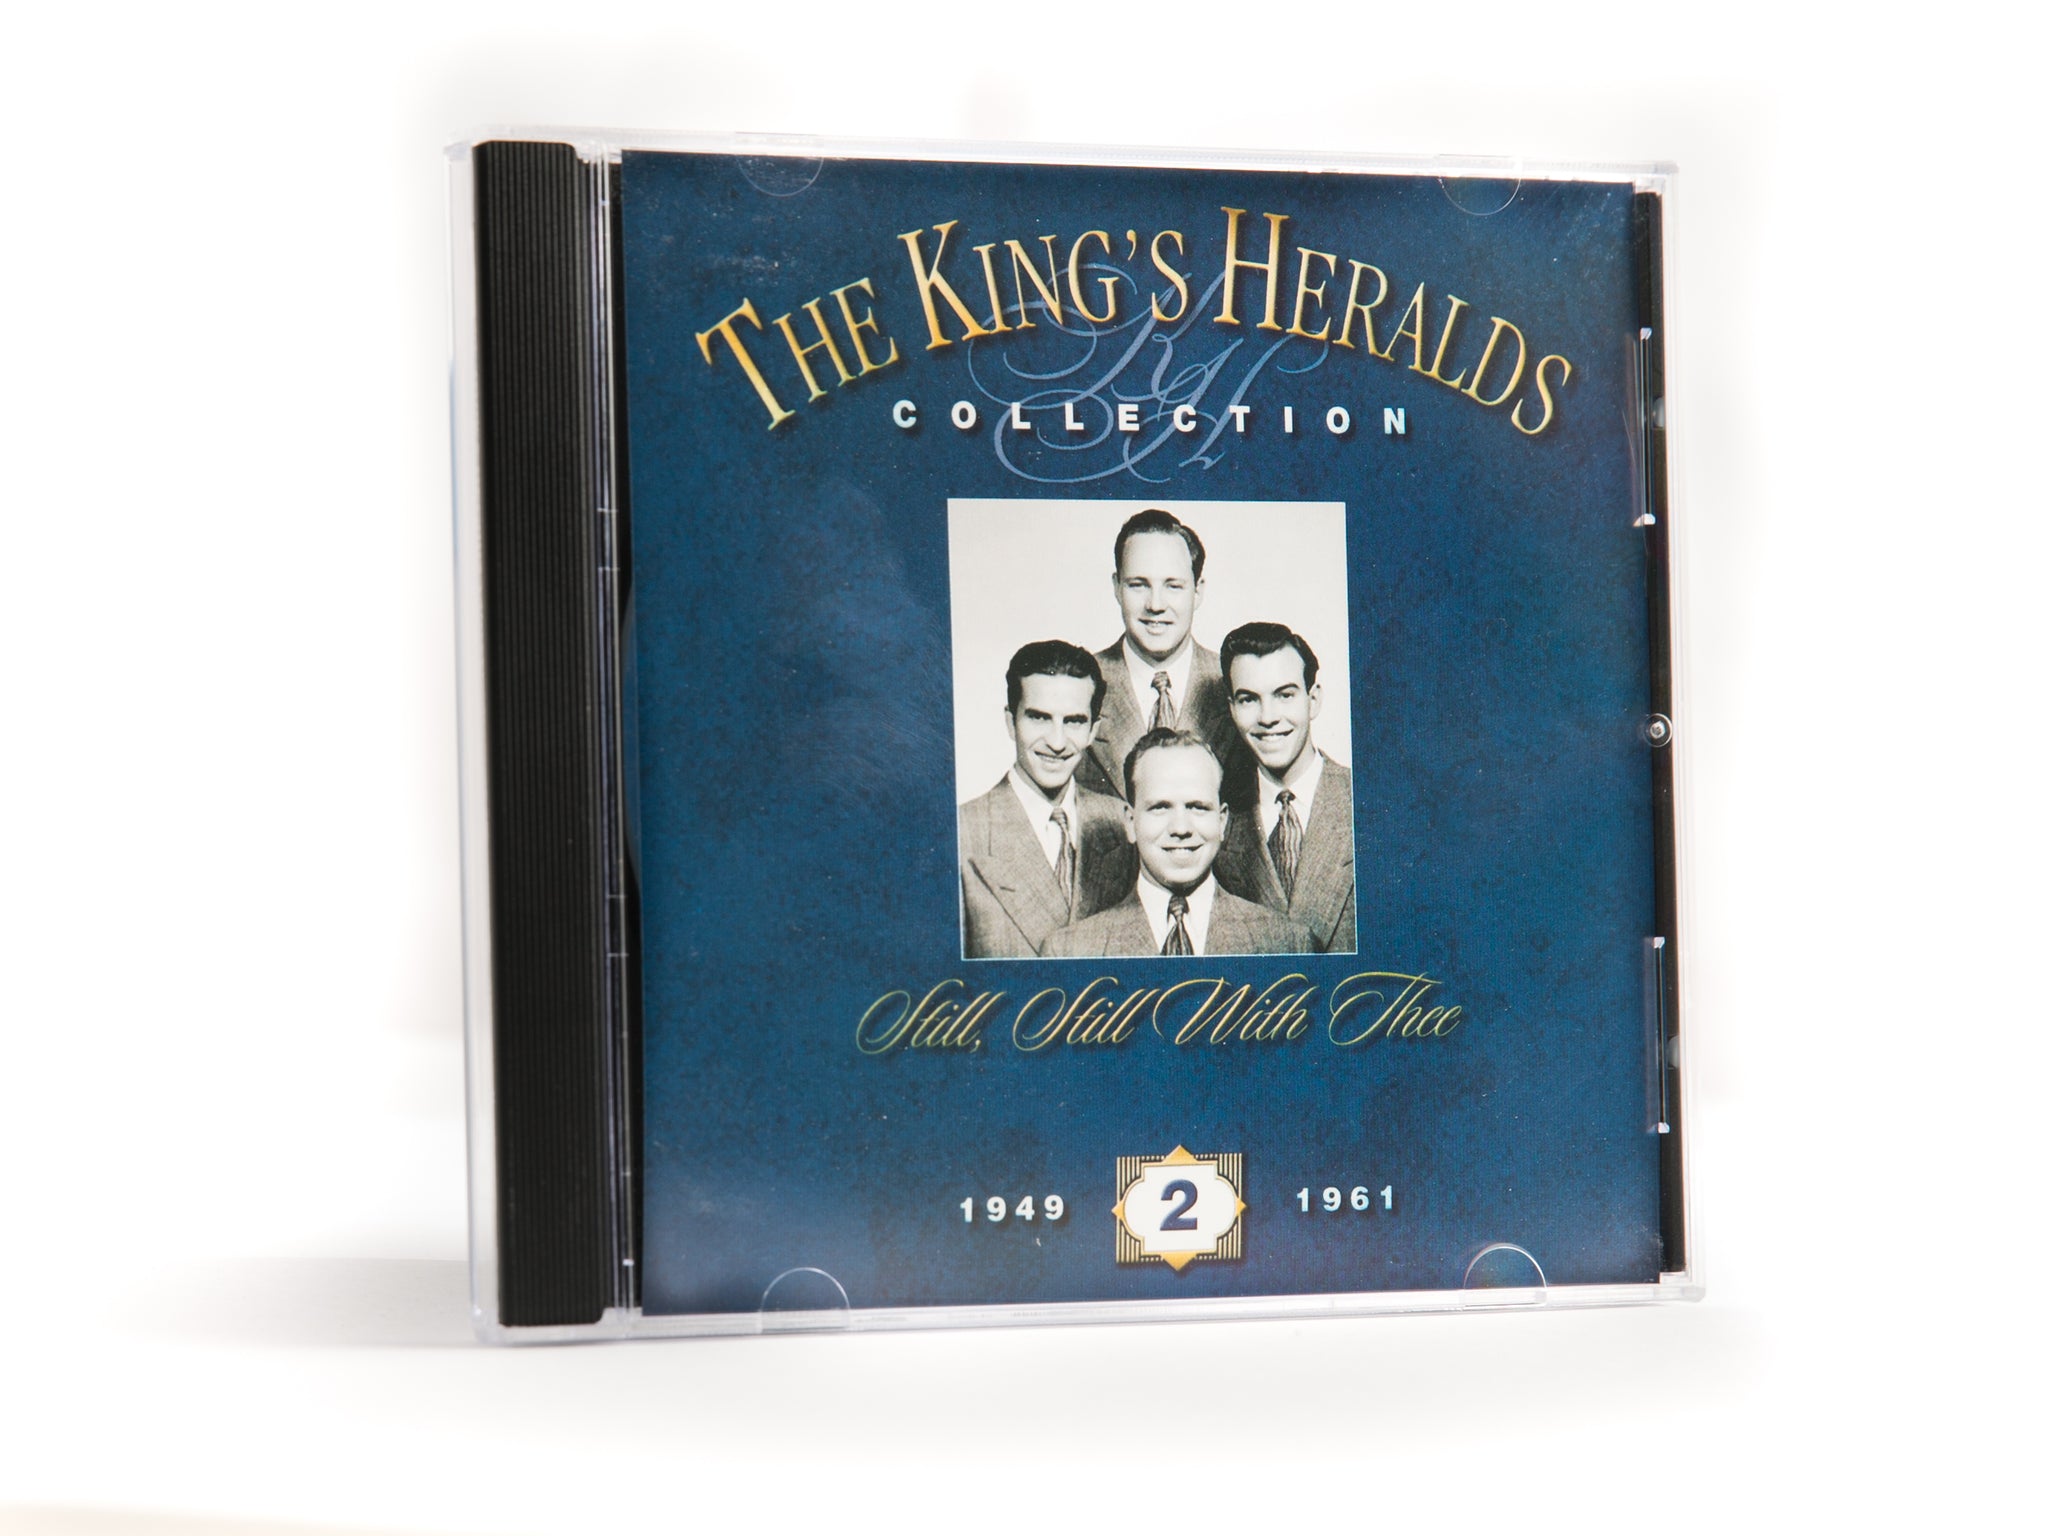 King's Heralds CD Collection - Vol. 2 - Still, Still With Thee